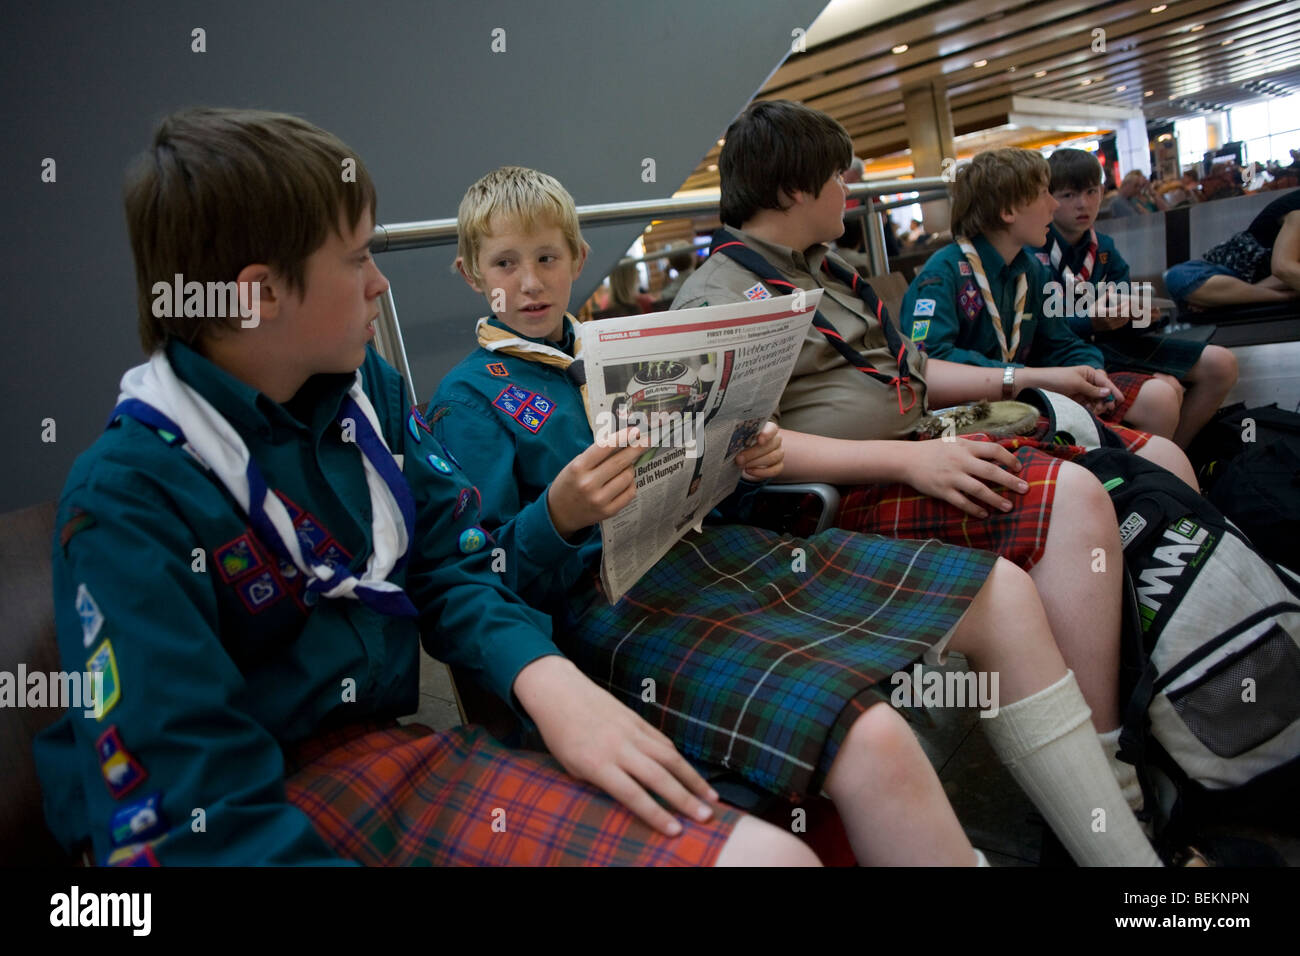 Boys from a Scottish scout group sit and in the departures concourse of Heathrow Airport's Terminal 5. Stock Photo